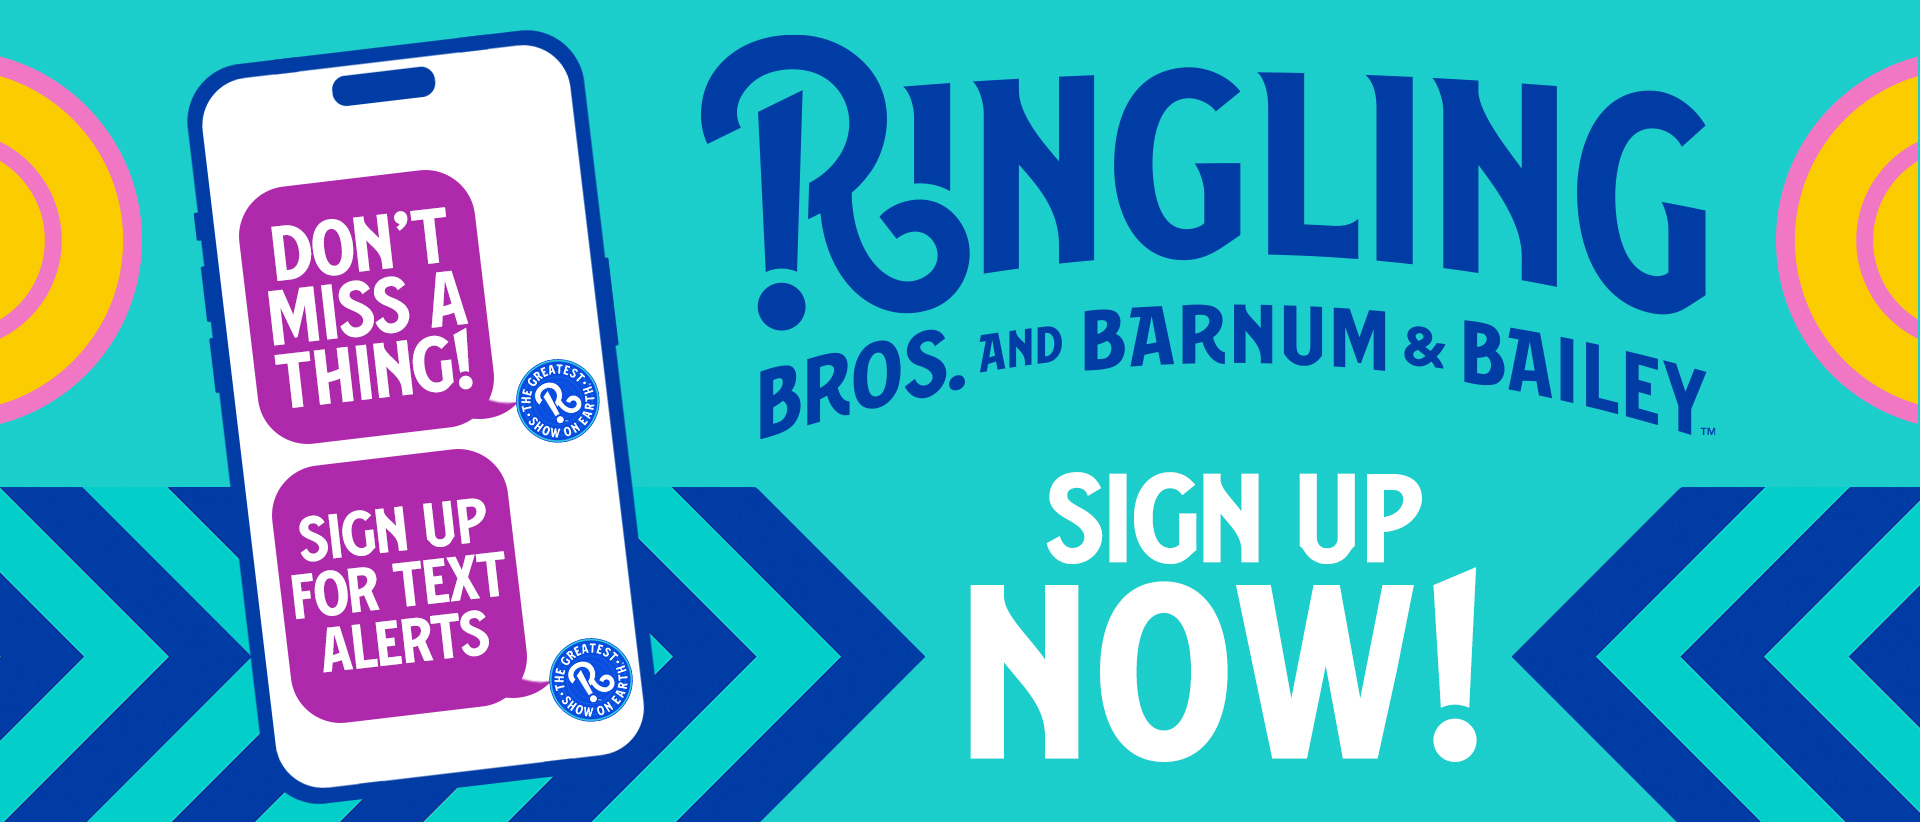 sign up for ringling texts